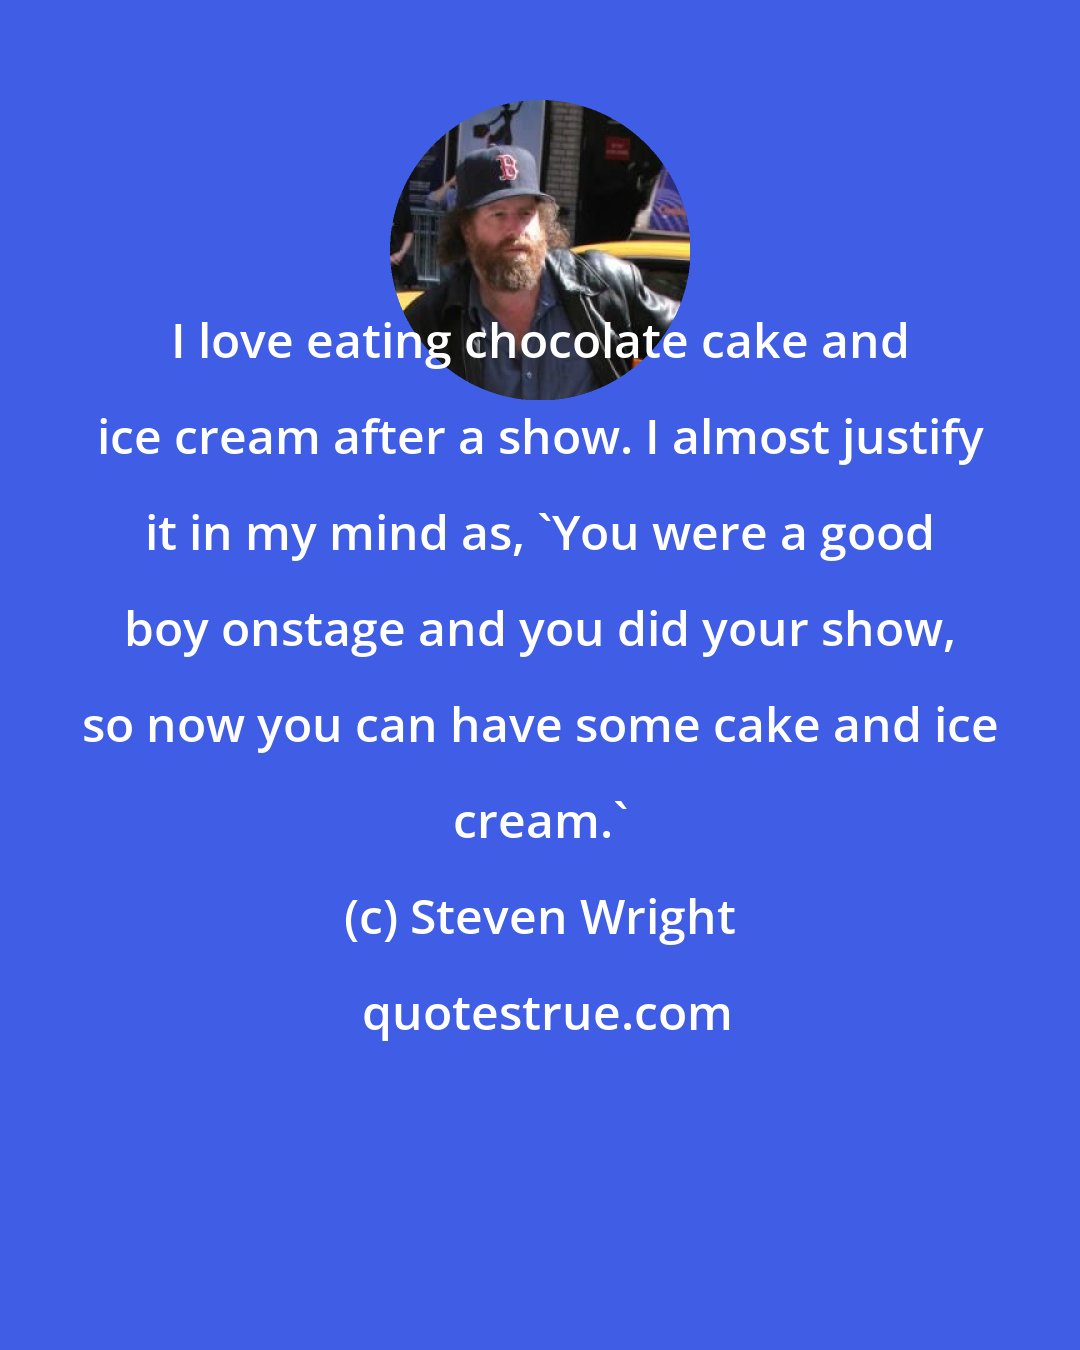 Steven Wright: I love eating chocolate cake and ice cream after a show. I almost justify it in my mind as, 'You were a good boy onstage and you did your show, so now you can have some cake and ice cream.'